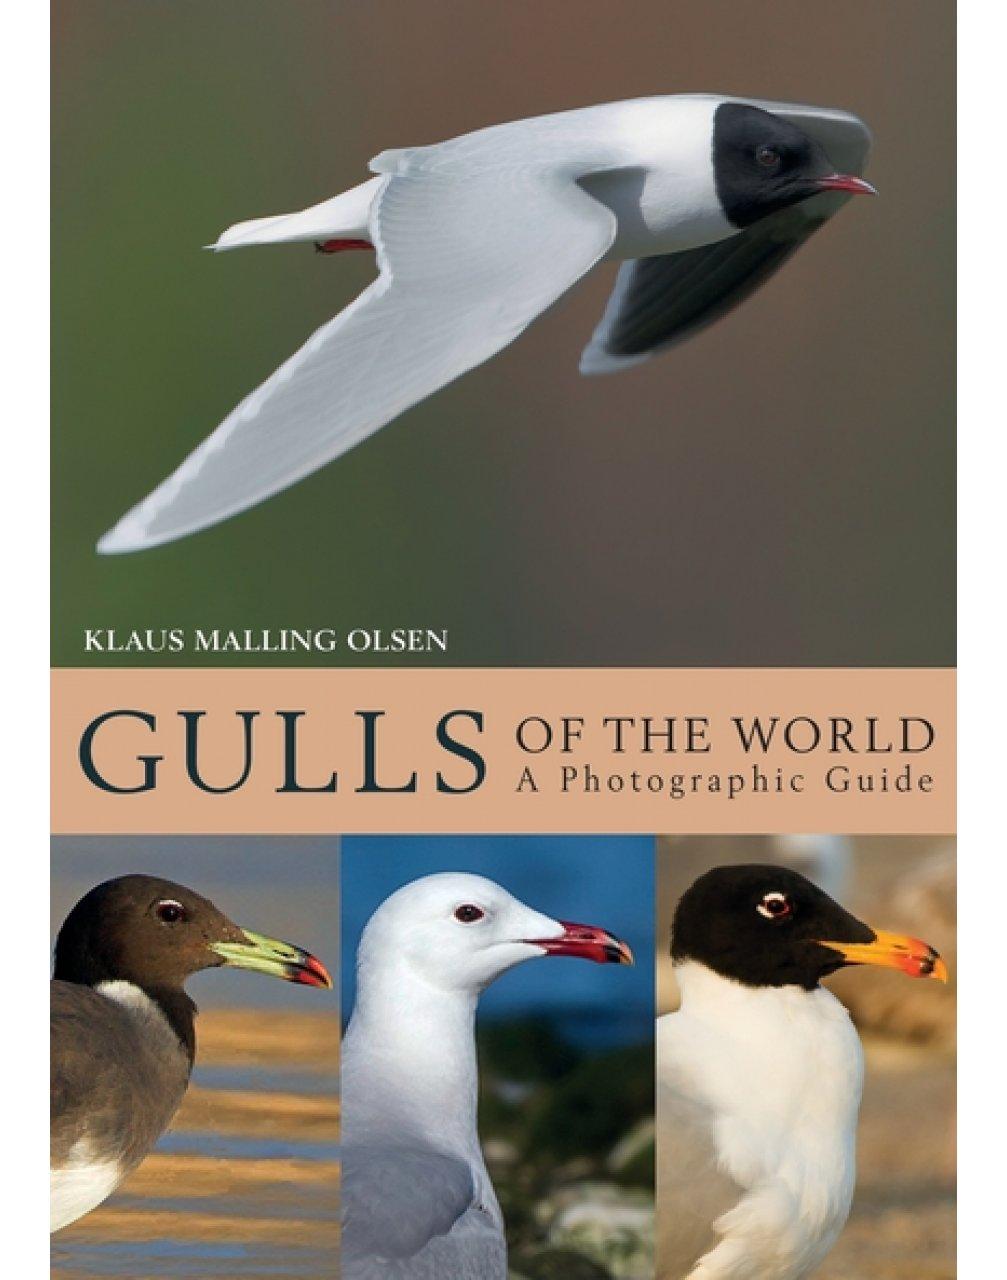 Gulls of the World – A Photographic Guide – Klaus Malling Olsen